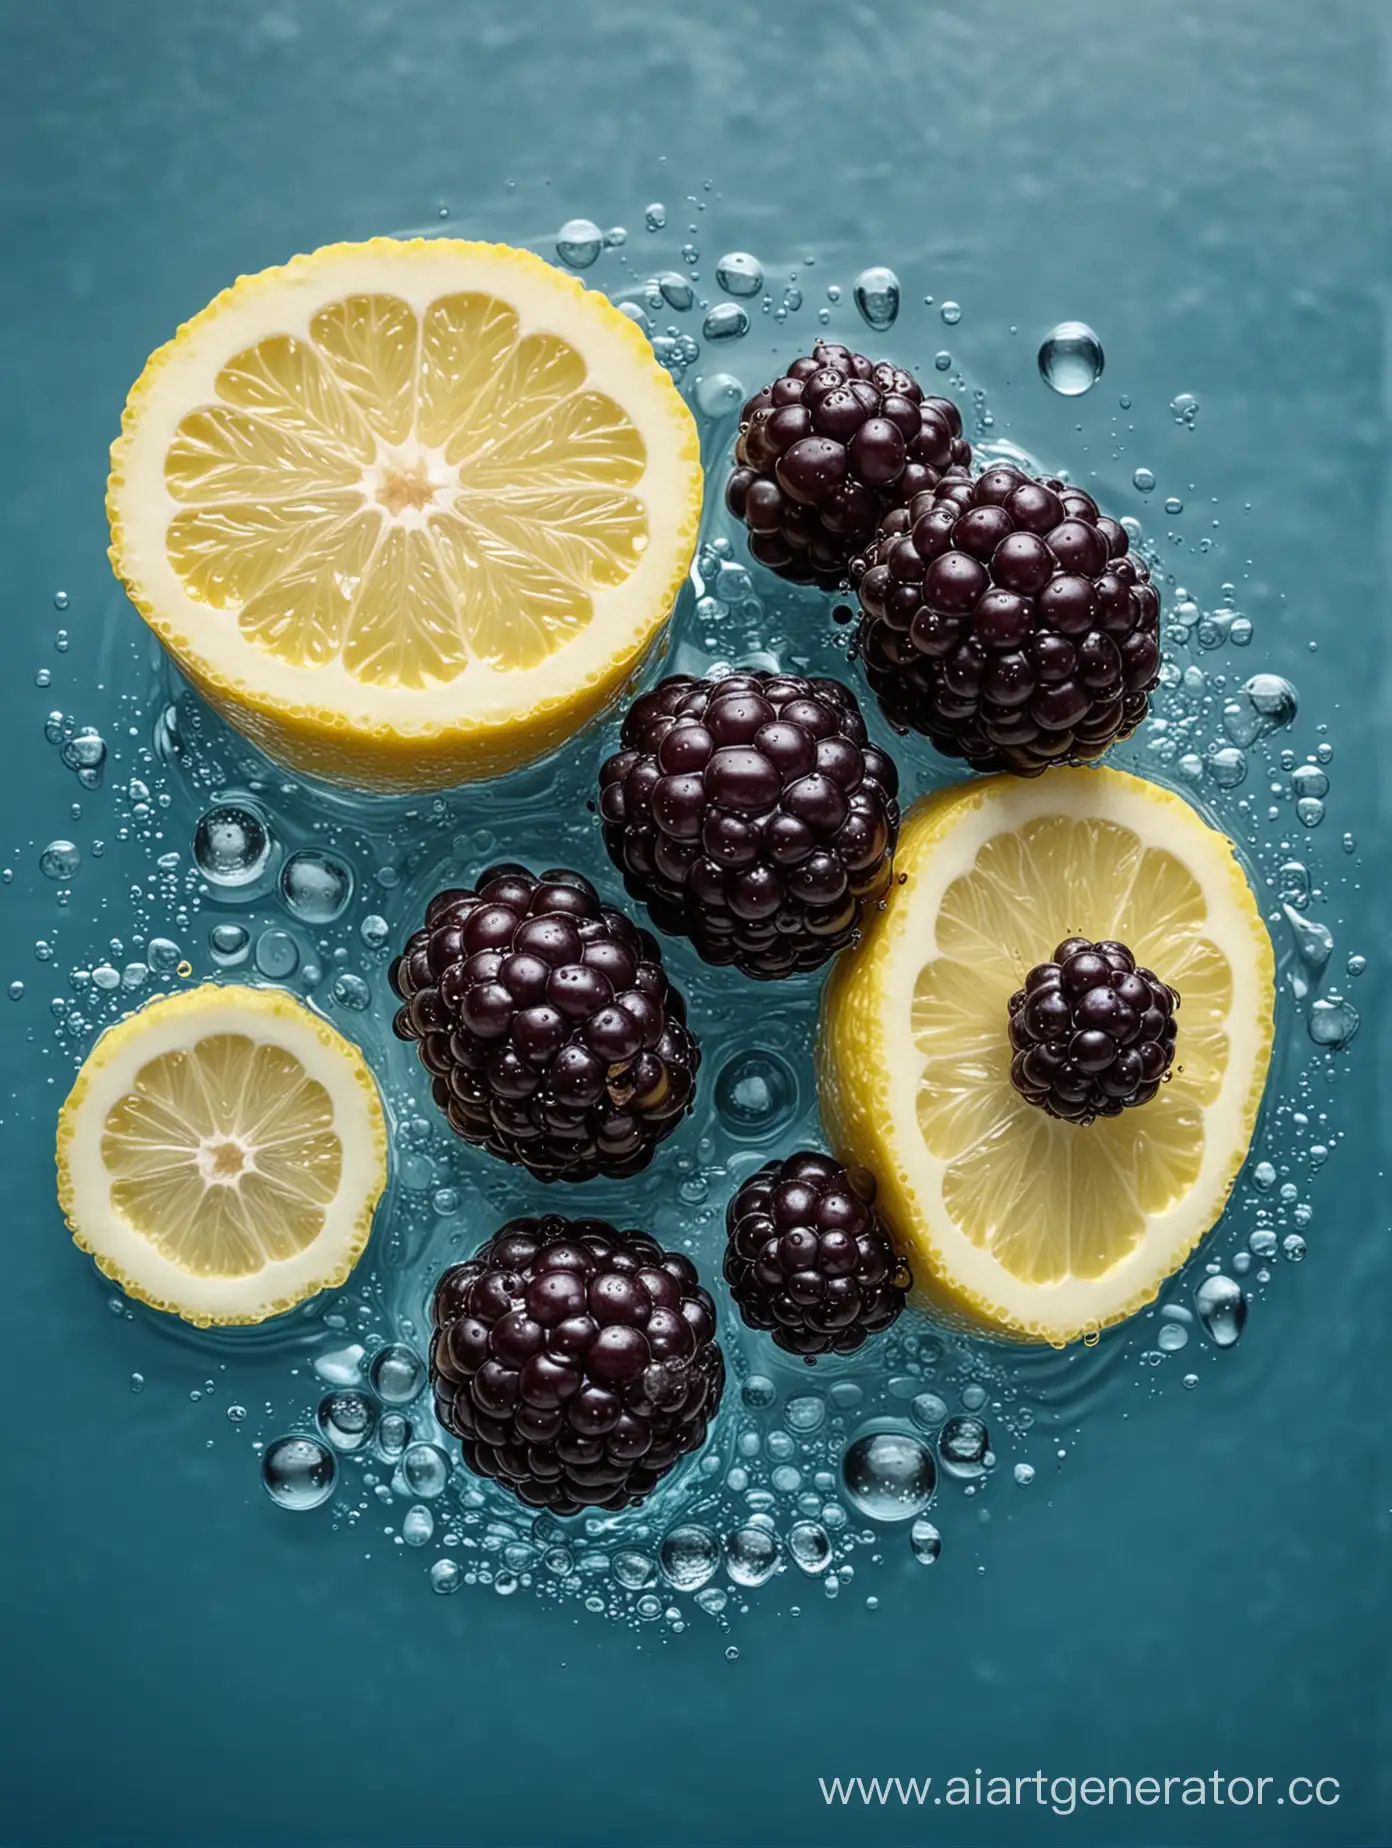 Boysenberry-with-Lemon-Slices-in-Blue-Water-Refreshing-Fruitscape-Macro-Photography